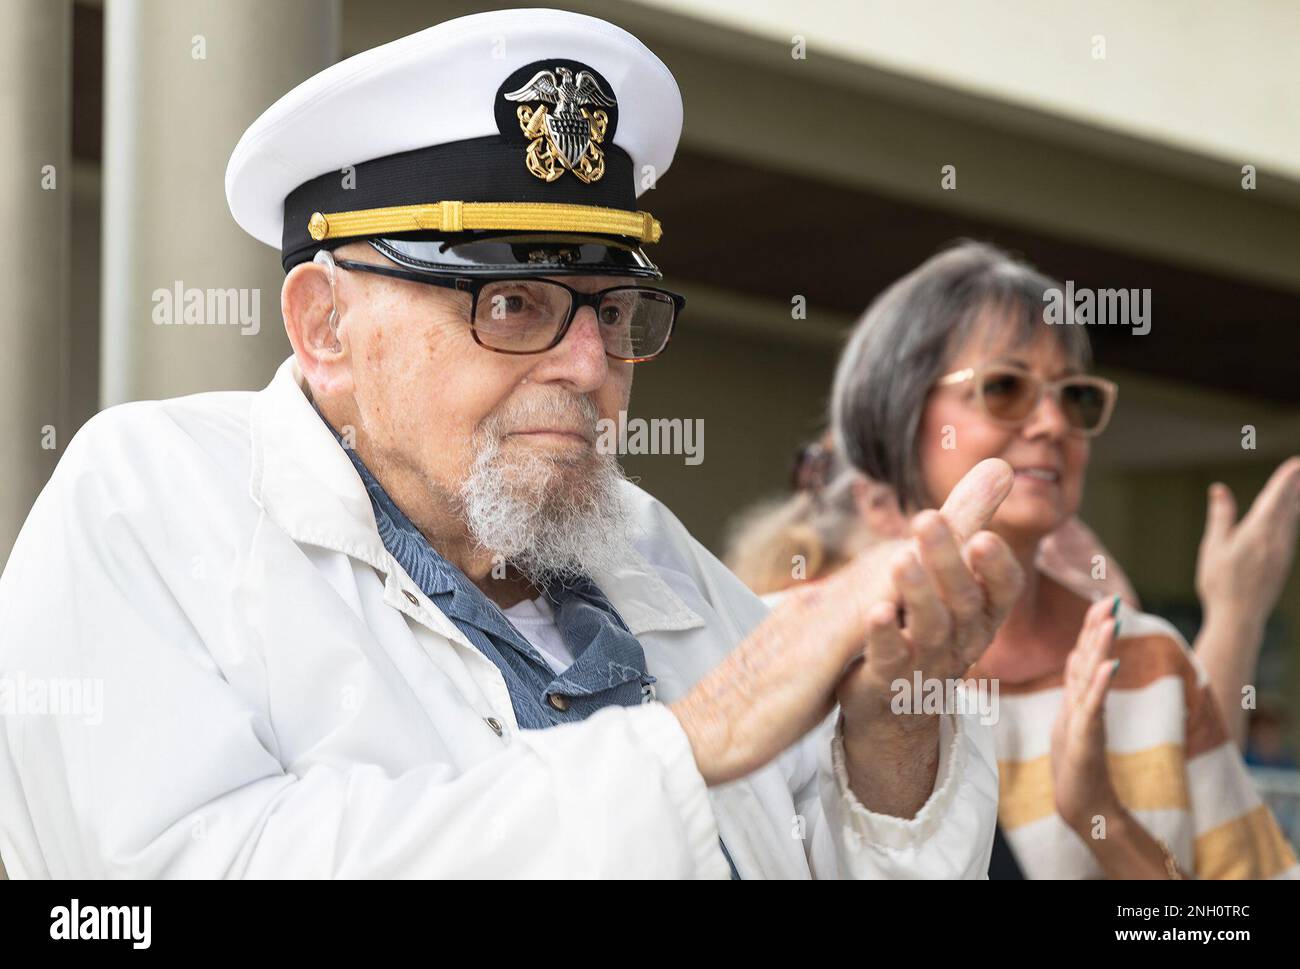 PEARL HARBOR, (Dec. 5, 2022) Former Navy musician’s mate and honorary bandmaster Ira 'Ike' Schaba, applaud the U.S. Pacific Fleet Band, which performed for World War II veterans and Pearl Harbor visitors during an 81st Anniversary Pearl Harbor Remembrance concert at the Pearl Harbor Visitor Center. Dec. 7, 2022, marks the 81st year since the attacks on Pearl Harbor and Oahu. The U.S. military, State of Hawaii and National Park Service are hosting a series of remembrance events throughout the week to honor the courage and sacrifices of those who served throughout the Pacific Theater. Today, the Stock Photo